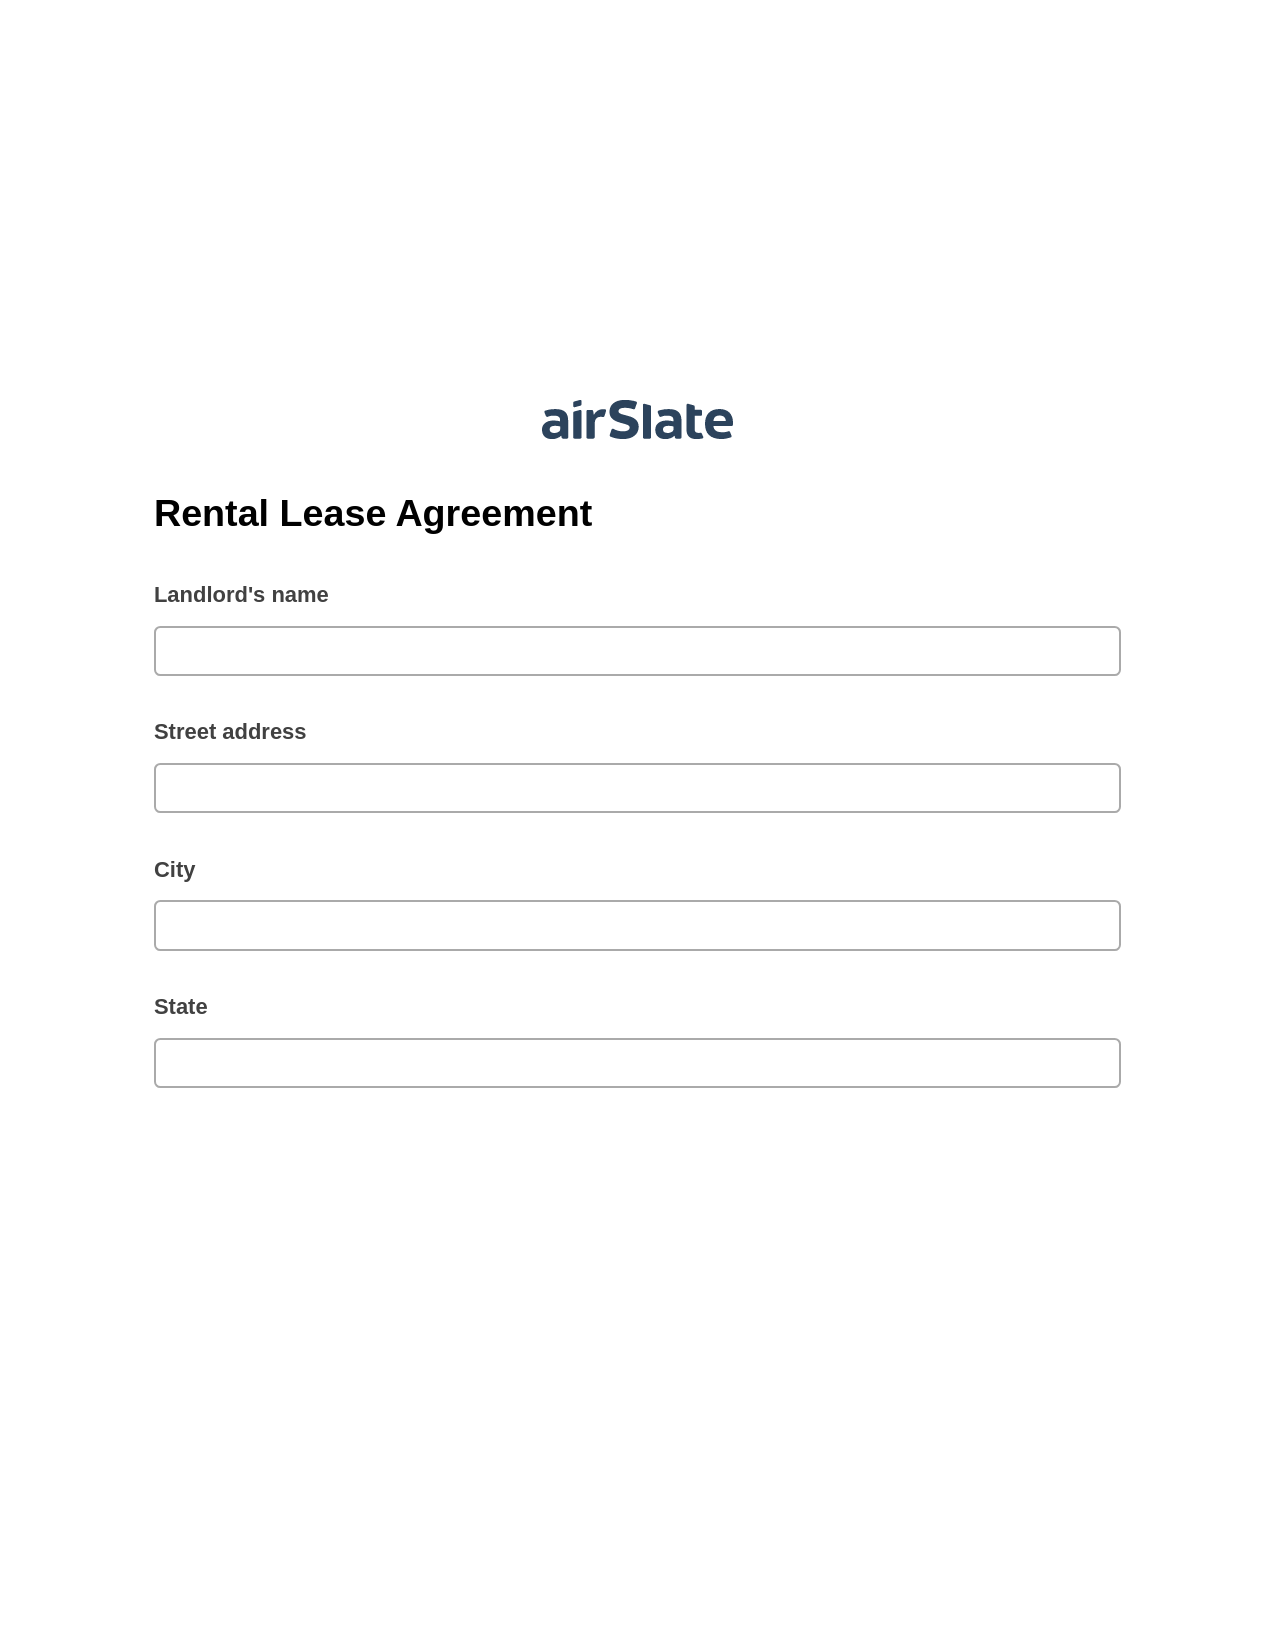 Rental Lease Agreement Pre-fill from Google Sheets Bot, System Bot - Create a Slate in another Flow, Export to Formstack Documents Bot